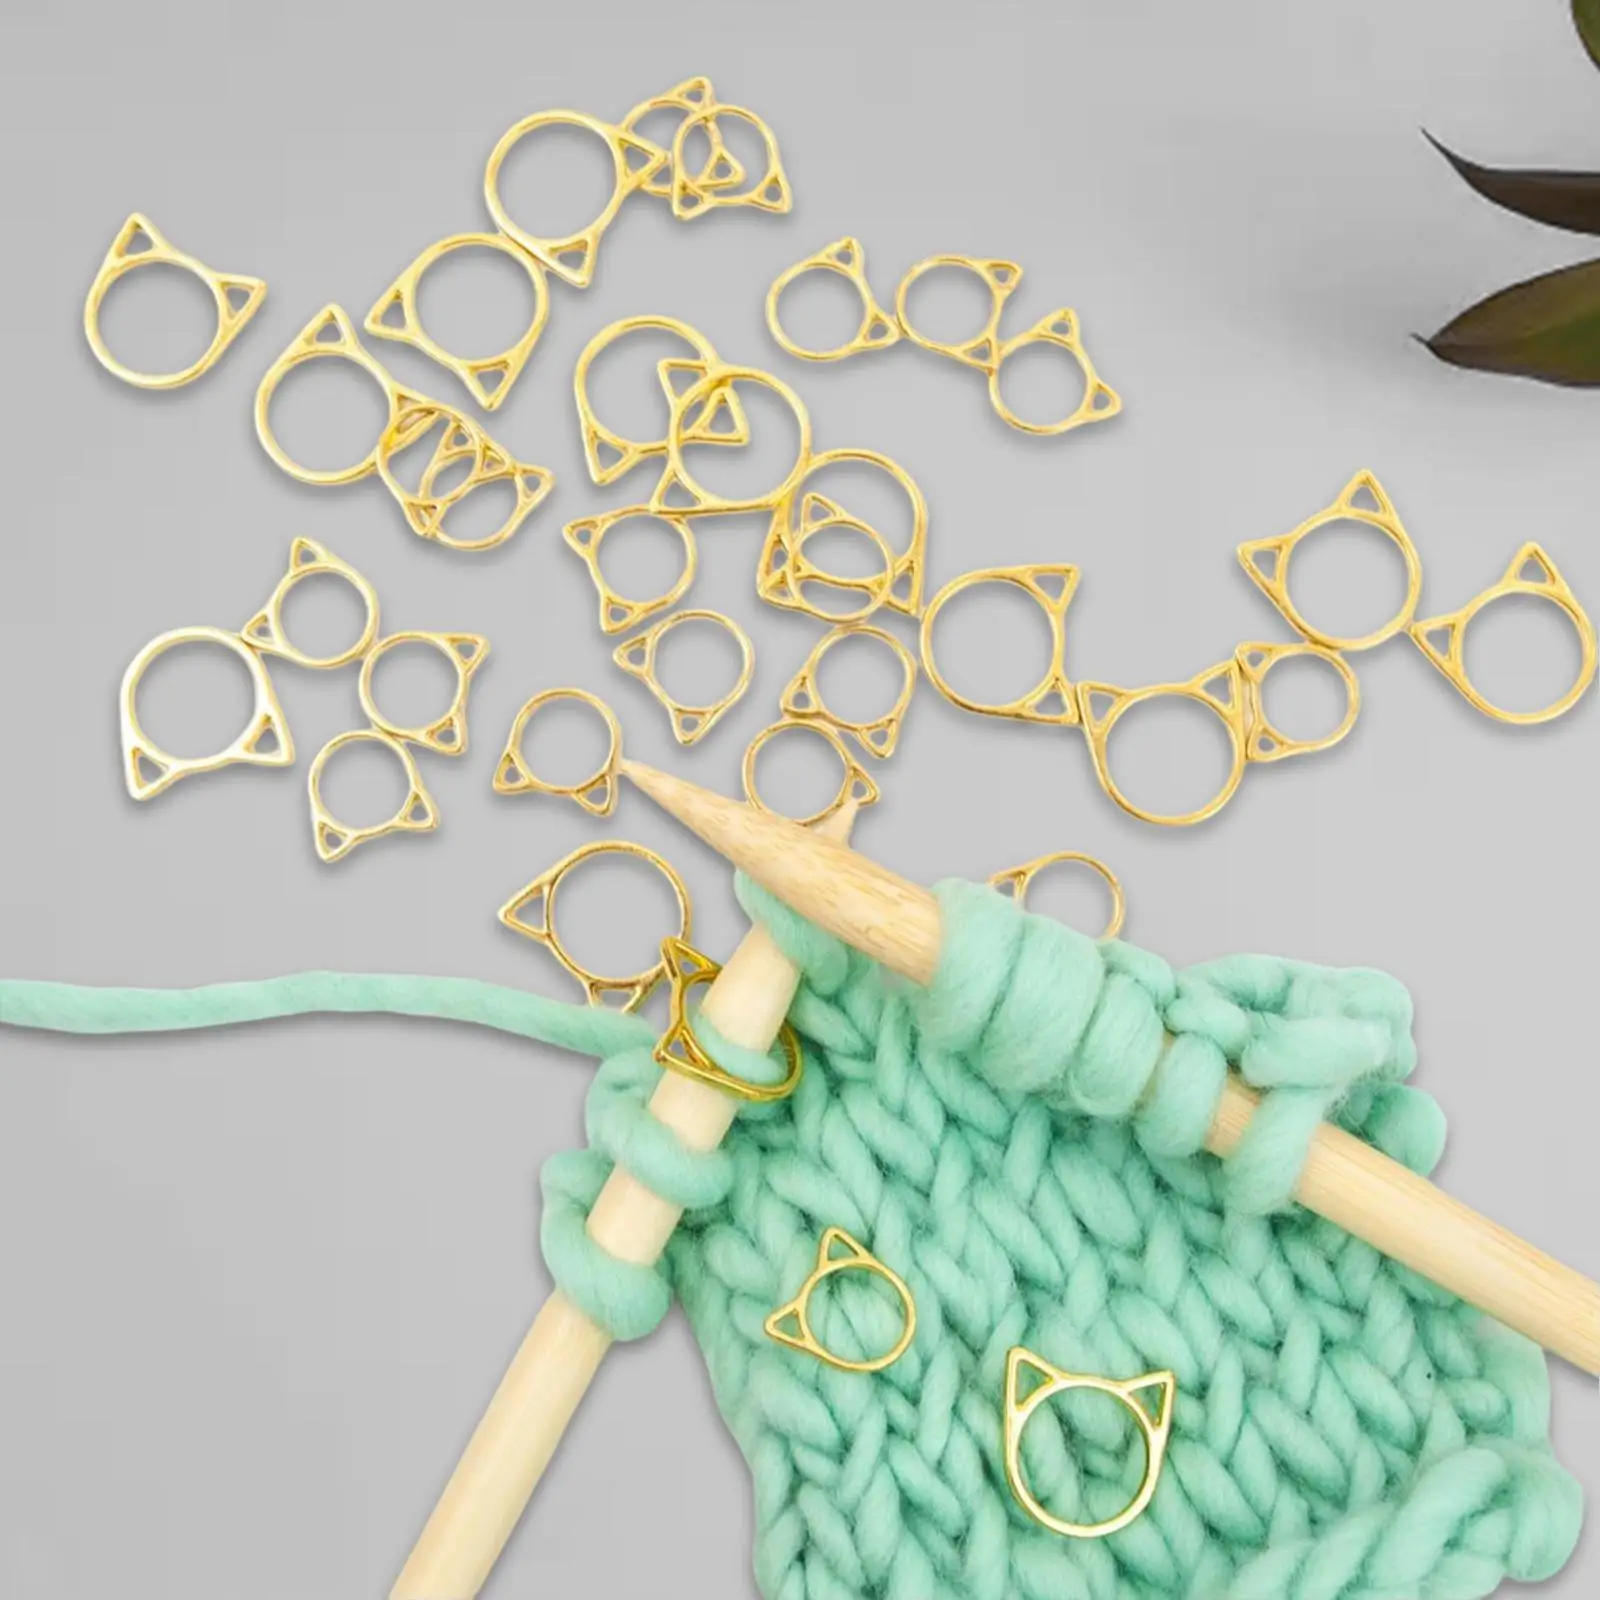 30Pcs Knitting Supplies Stitch Markers Crocheting Accessories Crochet Marker Cute DIY Crochet Accessories for DIY Handmade Craft